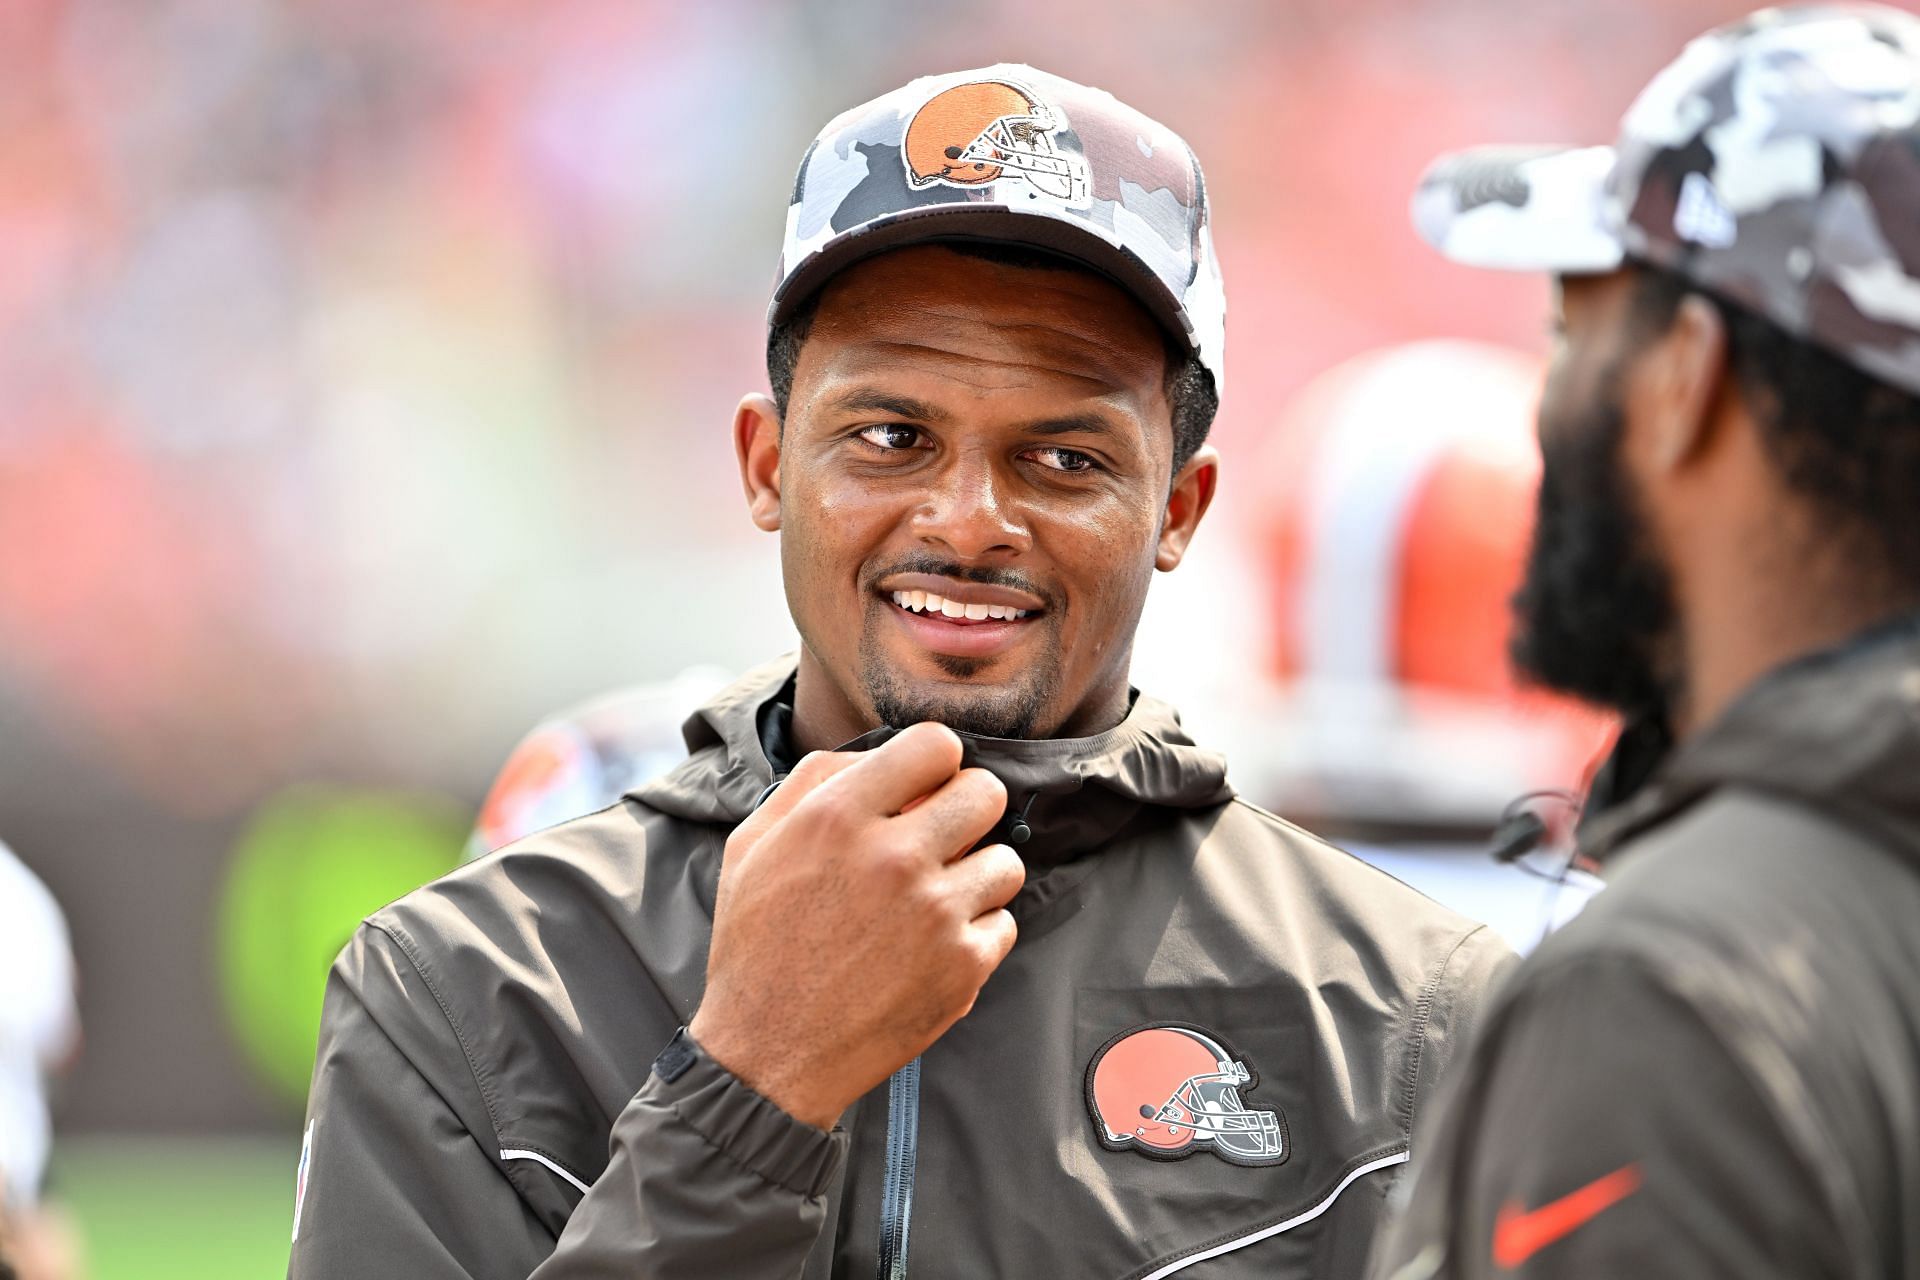 Deshaun Watson is likely to get the nod ahead of Jacoby Brissett